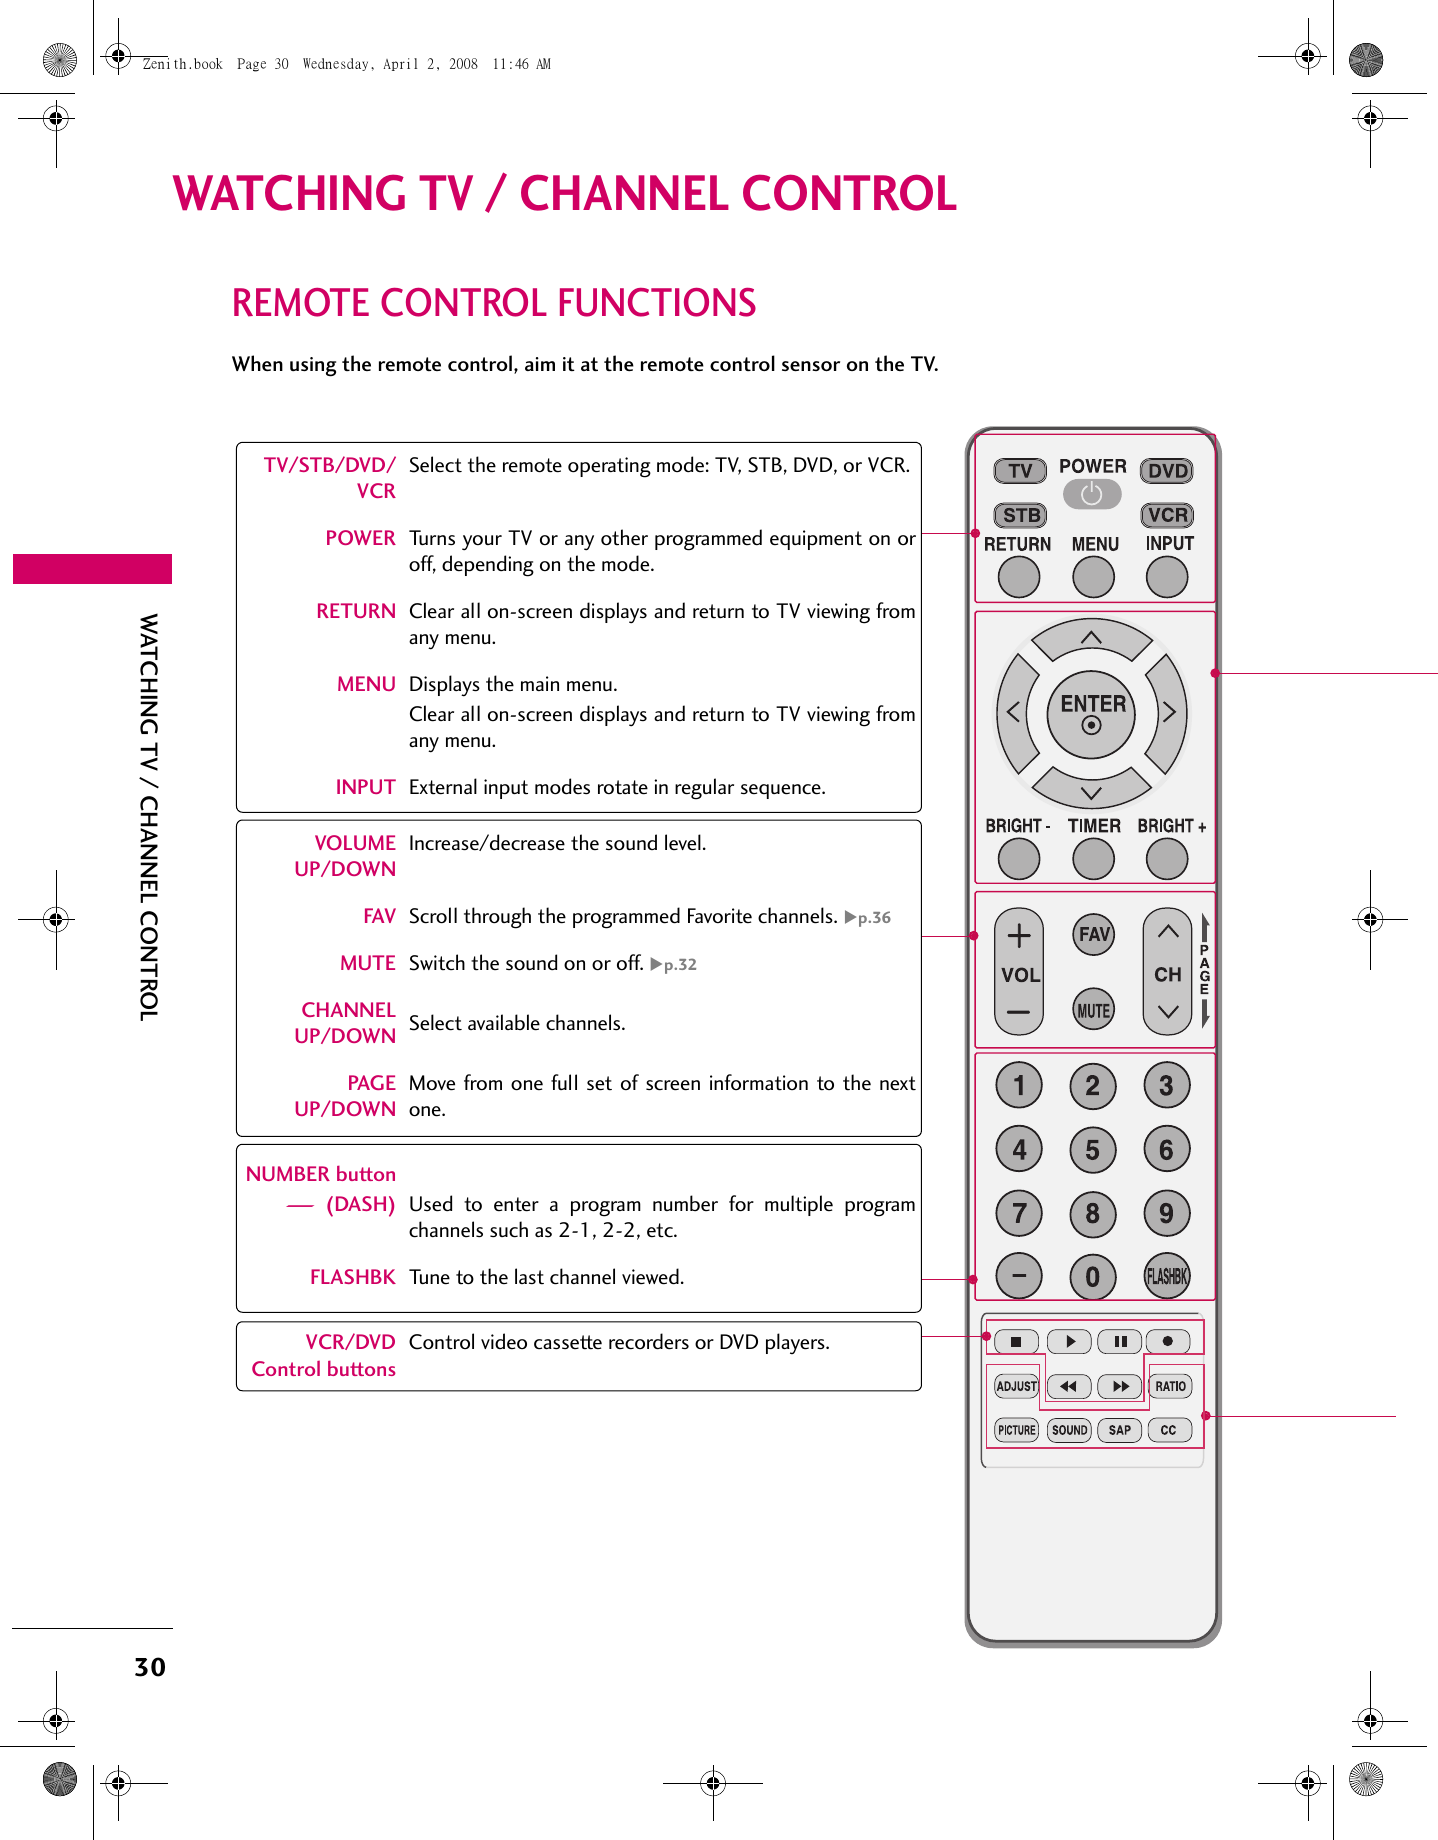 30WATCHING TV / CHANNEL CONTROLWATCHING TV / CHANNEL CONTROLREMOTE CONTROL FUNCTIONSWhen using the remote control, aim it at the remote control sensor on the TV.TV/STB/DVD/VCRSelect the remote operating mode: TV, STB, DVD, or VCR. POWER Turns your TV or any other programmed equipment on oroff, depending on the mode.RETURN Clear all on-screen displays and return to TV viewing fromany menu.MENU Displays the main menu.Clear all on-screen displays and return to TV viewing fromany menu.INPUT External input modes rotate in regular sequence.VOLUMEUP/DOWNIncrease/decrease the sound level.FAV Scroll through the programmed Favorite channels. Xp.36MUTE Switch the sound on or off. Xp.32CHANNELUP/DOWN Select available channels.PAGEUP/DOWNMove from one full set of screen information to the nextone.NUMBER button- (DASH) Used to enter a program number for multiple programchannels such as 2-1, 2-2, etc.FLASHBK Tune to the last channel viewed.VCR/DVDControl buttonsControl video cassette recorders or DVD players.Zenith.book  Page 30  Wednesday, April 2, 2008  11:46 AM